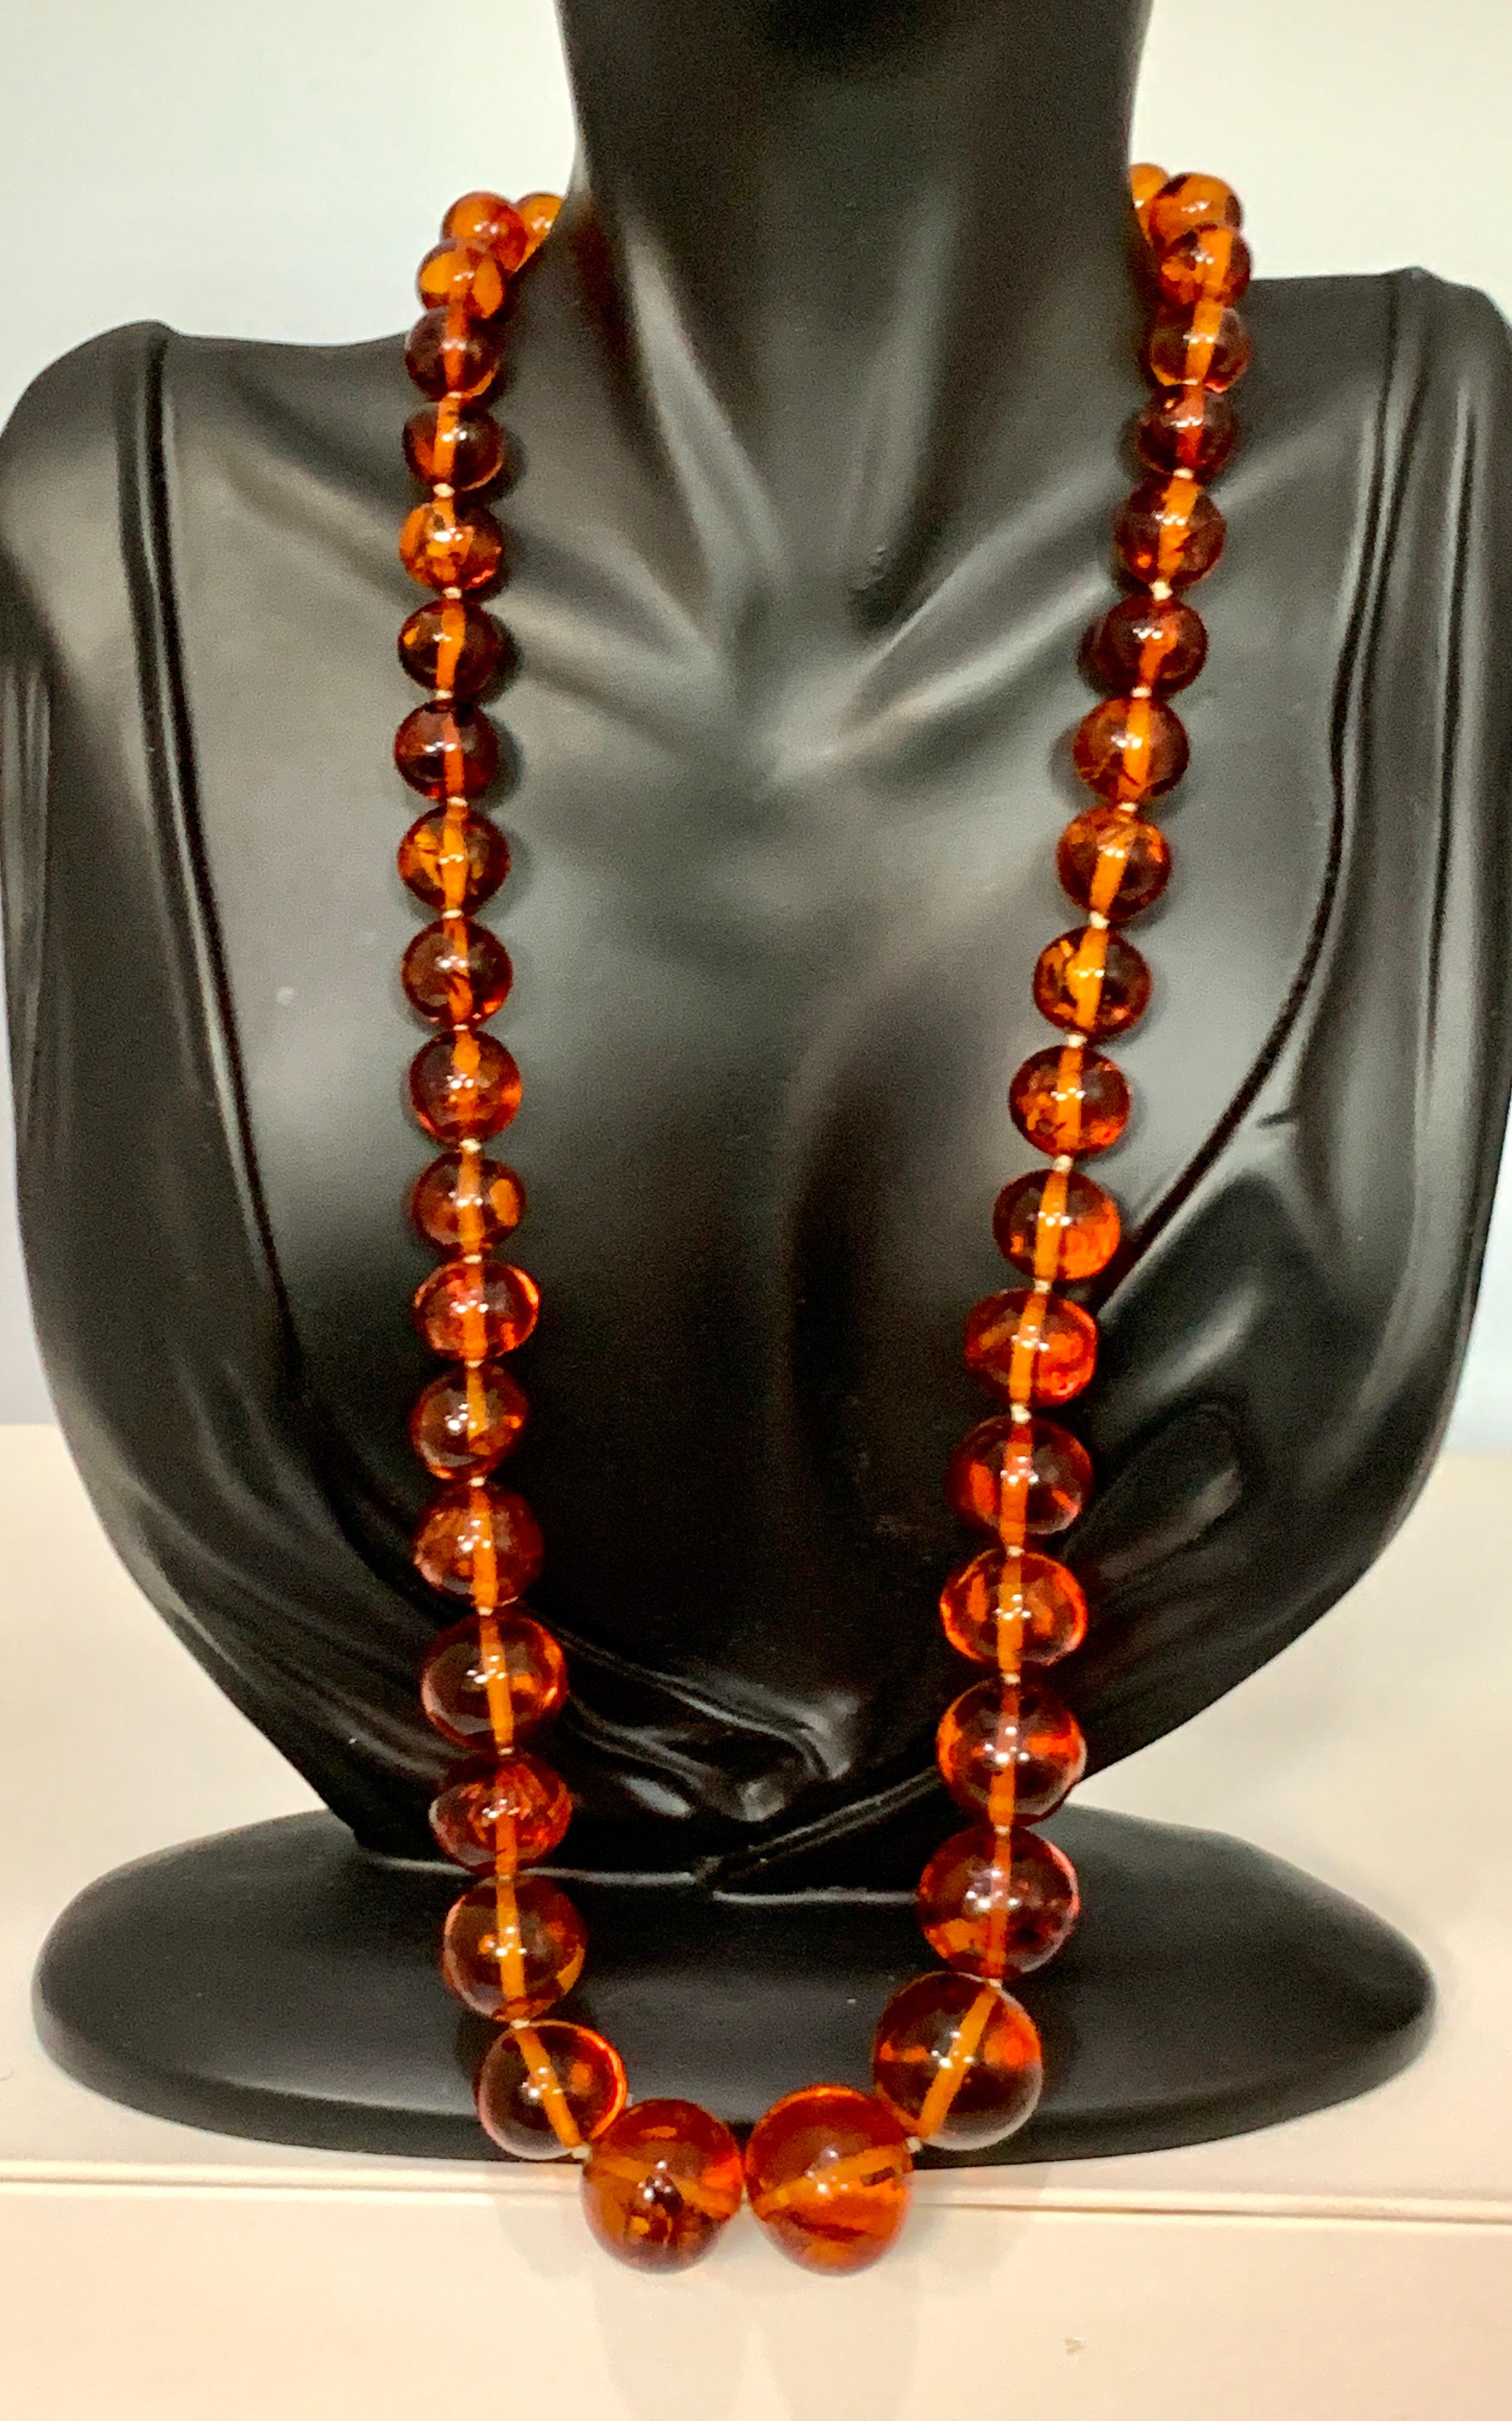 Women's 250 Ct Natural Amber Single Strand Graduating Bead Necklace with 18K Gold Clasp